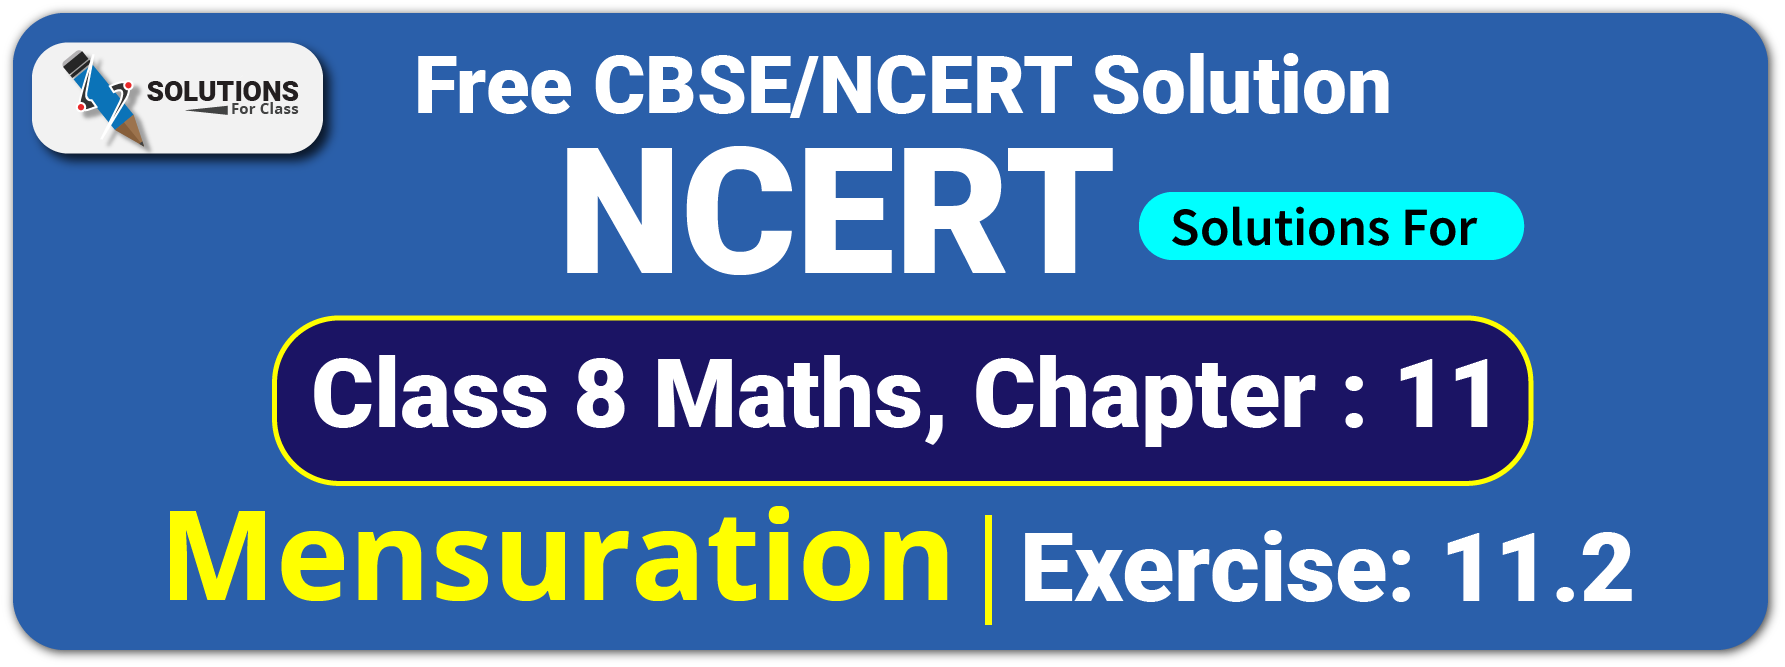 NCERT Solutions For Class 8 Chapter 11, Mensuration, Exercise.11.2